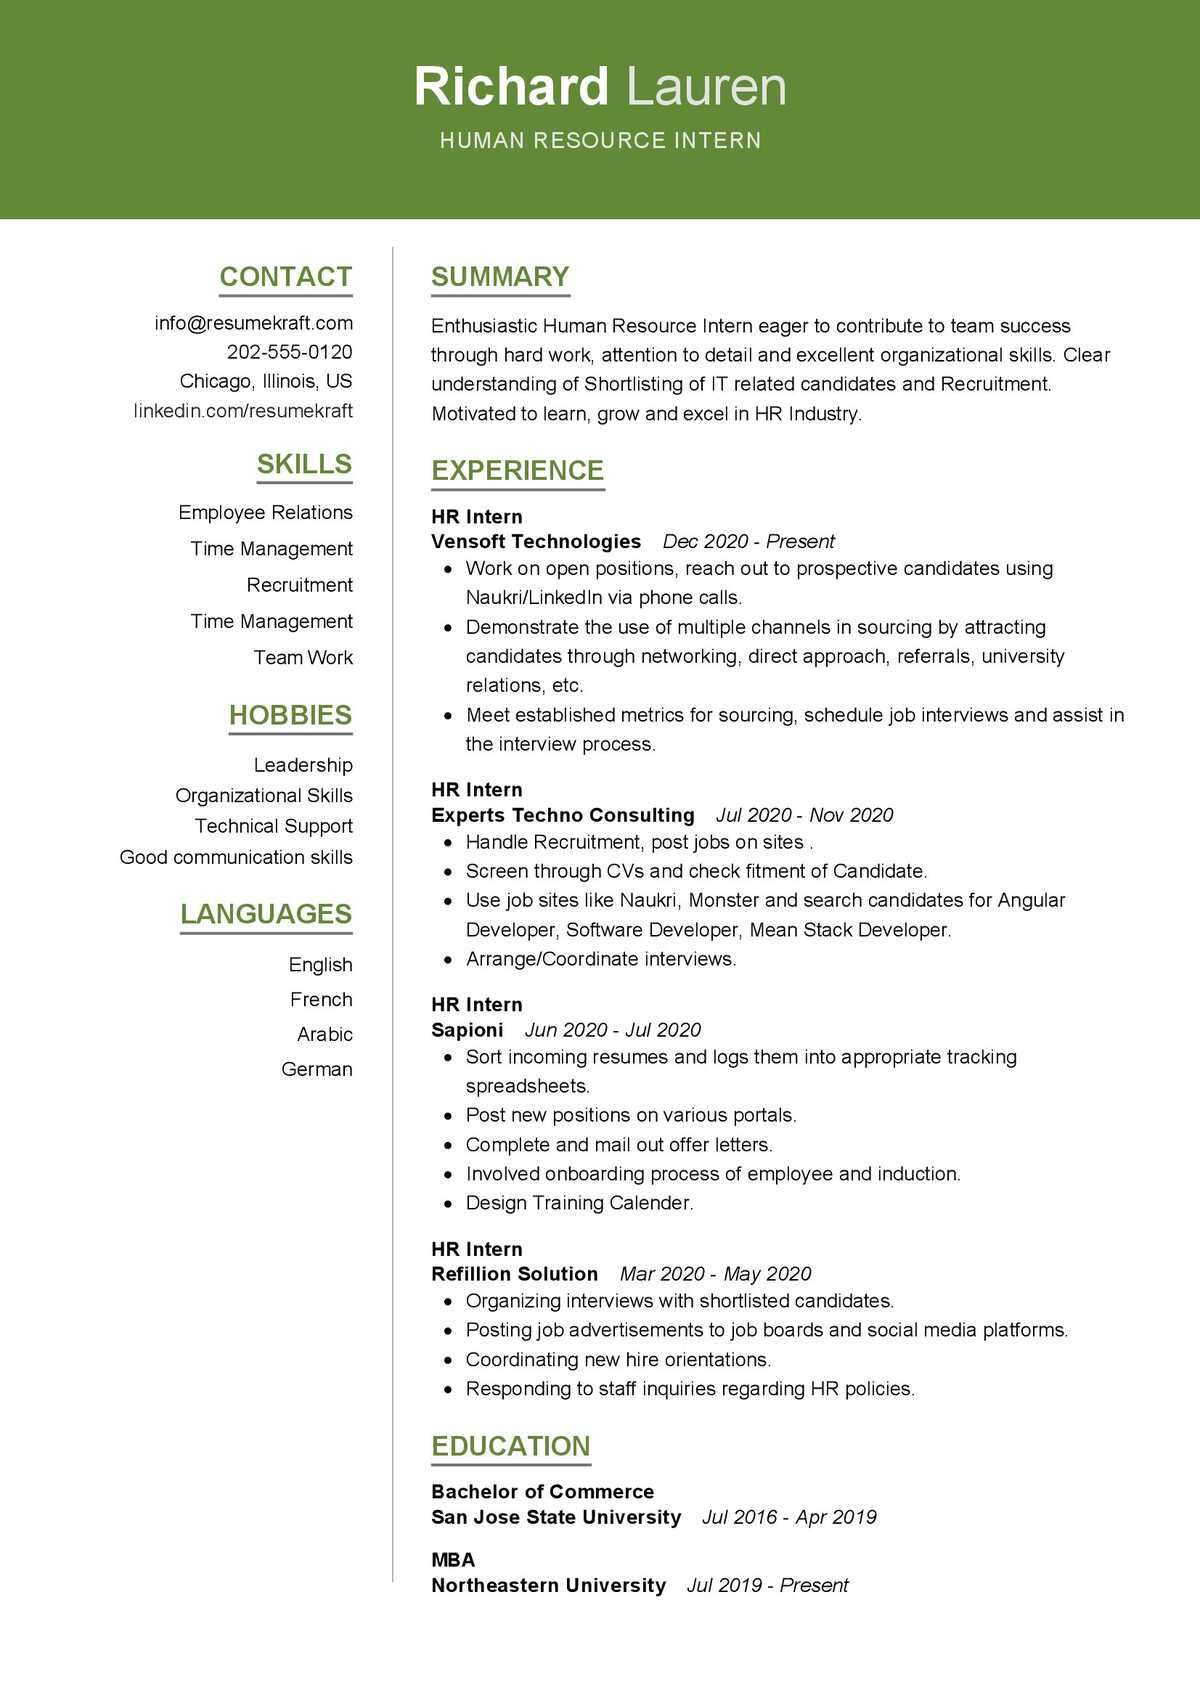 Resume Headline Samples for Human Resources Human Resource Intern Resume Sample 2021 Writing Tips – Resumekraft